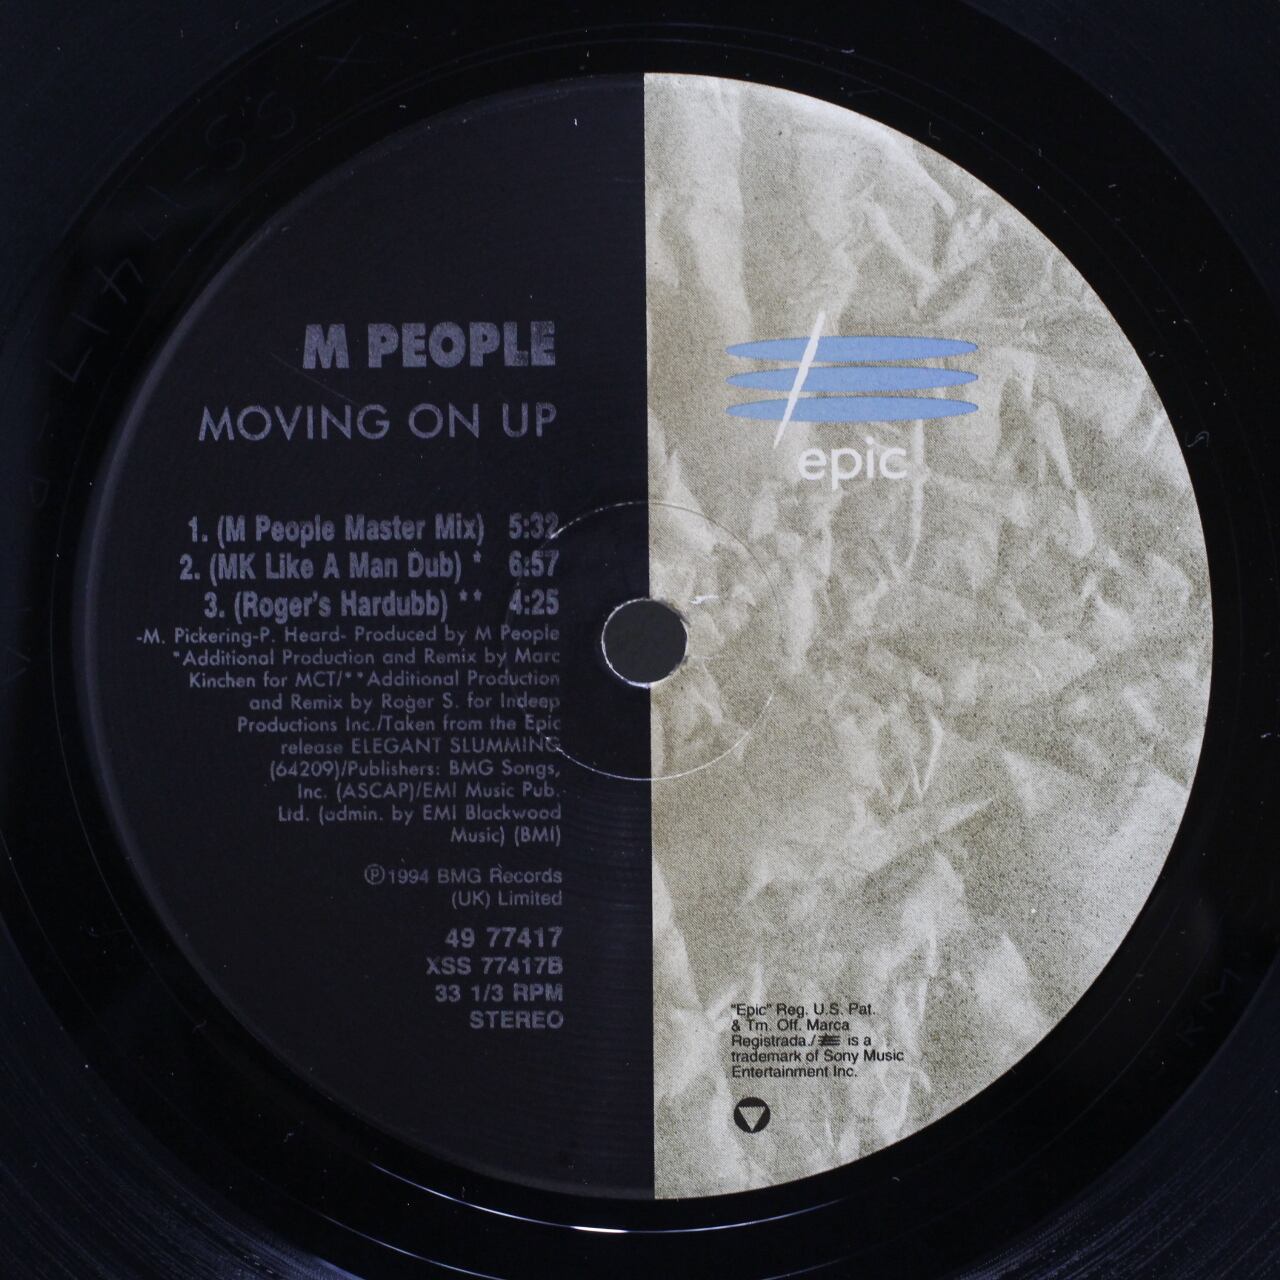 M People / Moving On Up [49 77417] - 画像3